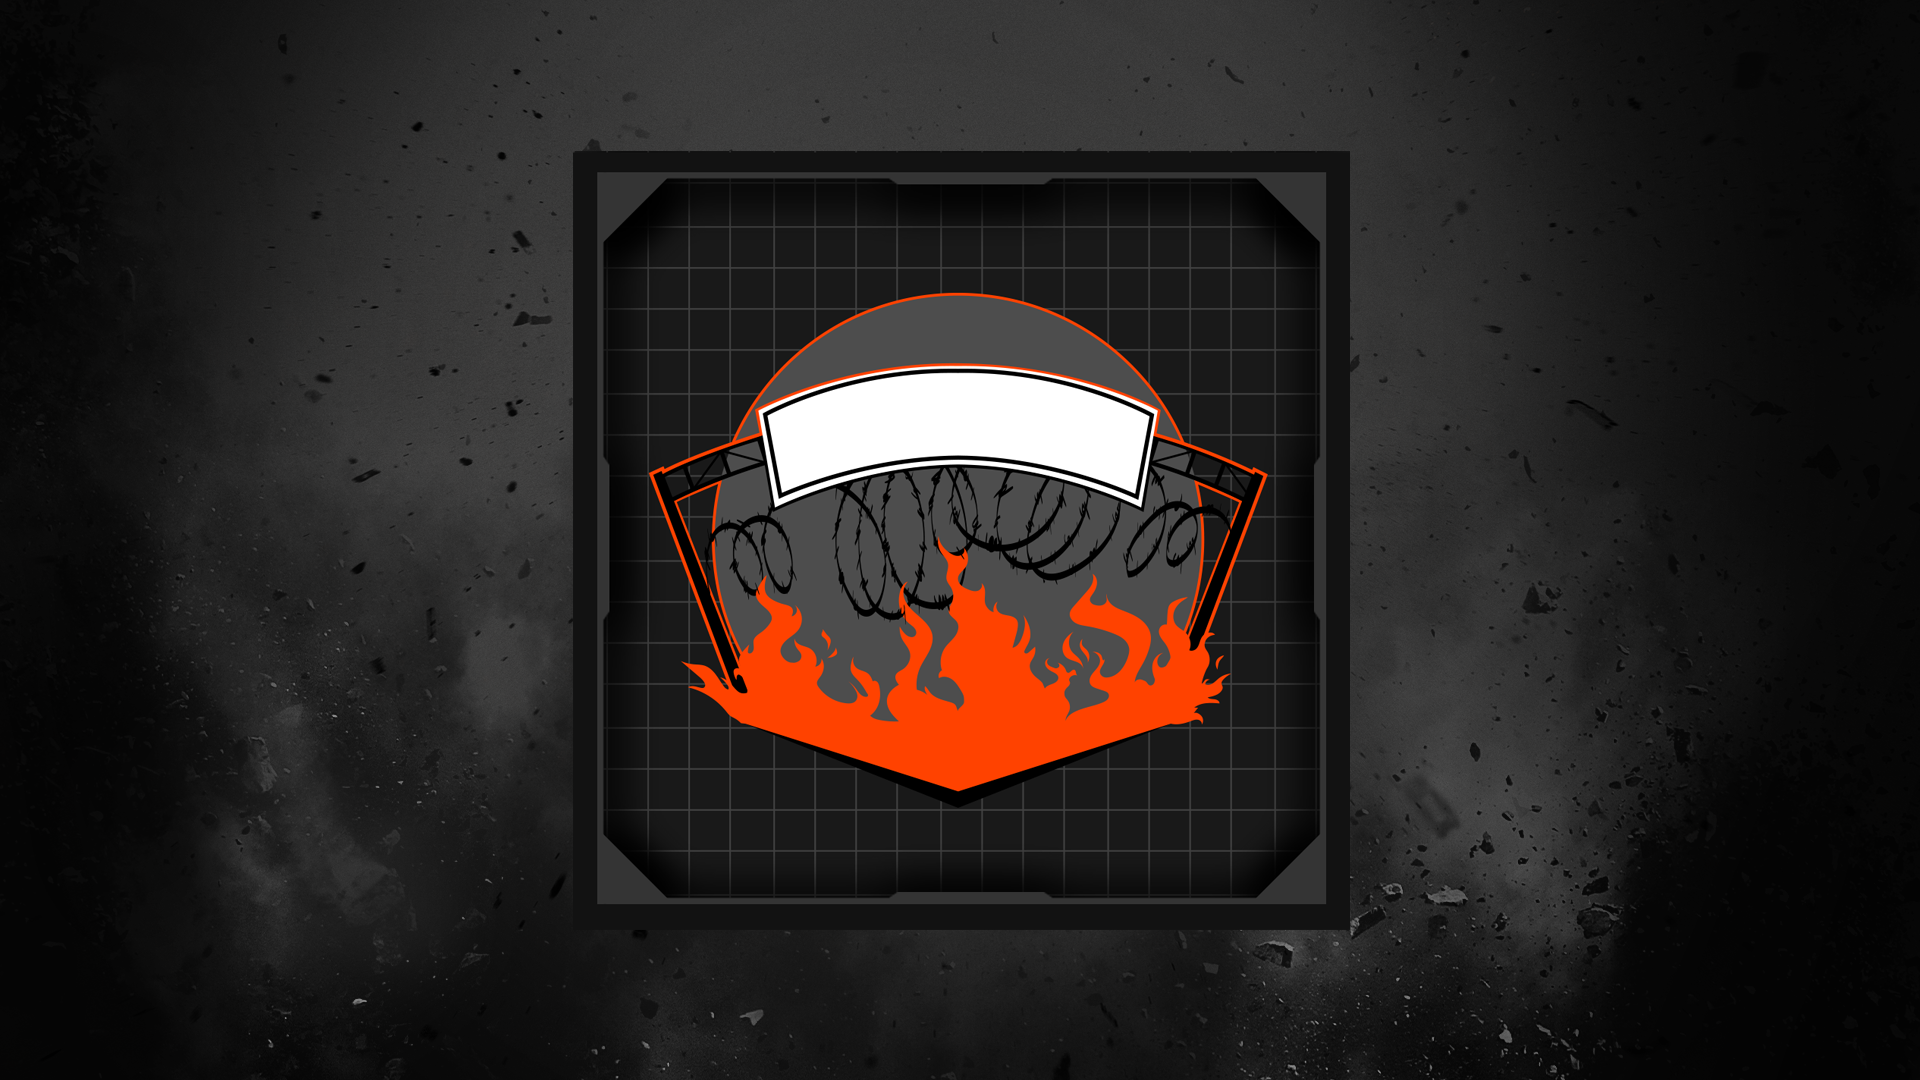 Icon for Checkpoint Zulu